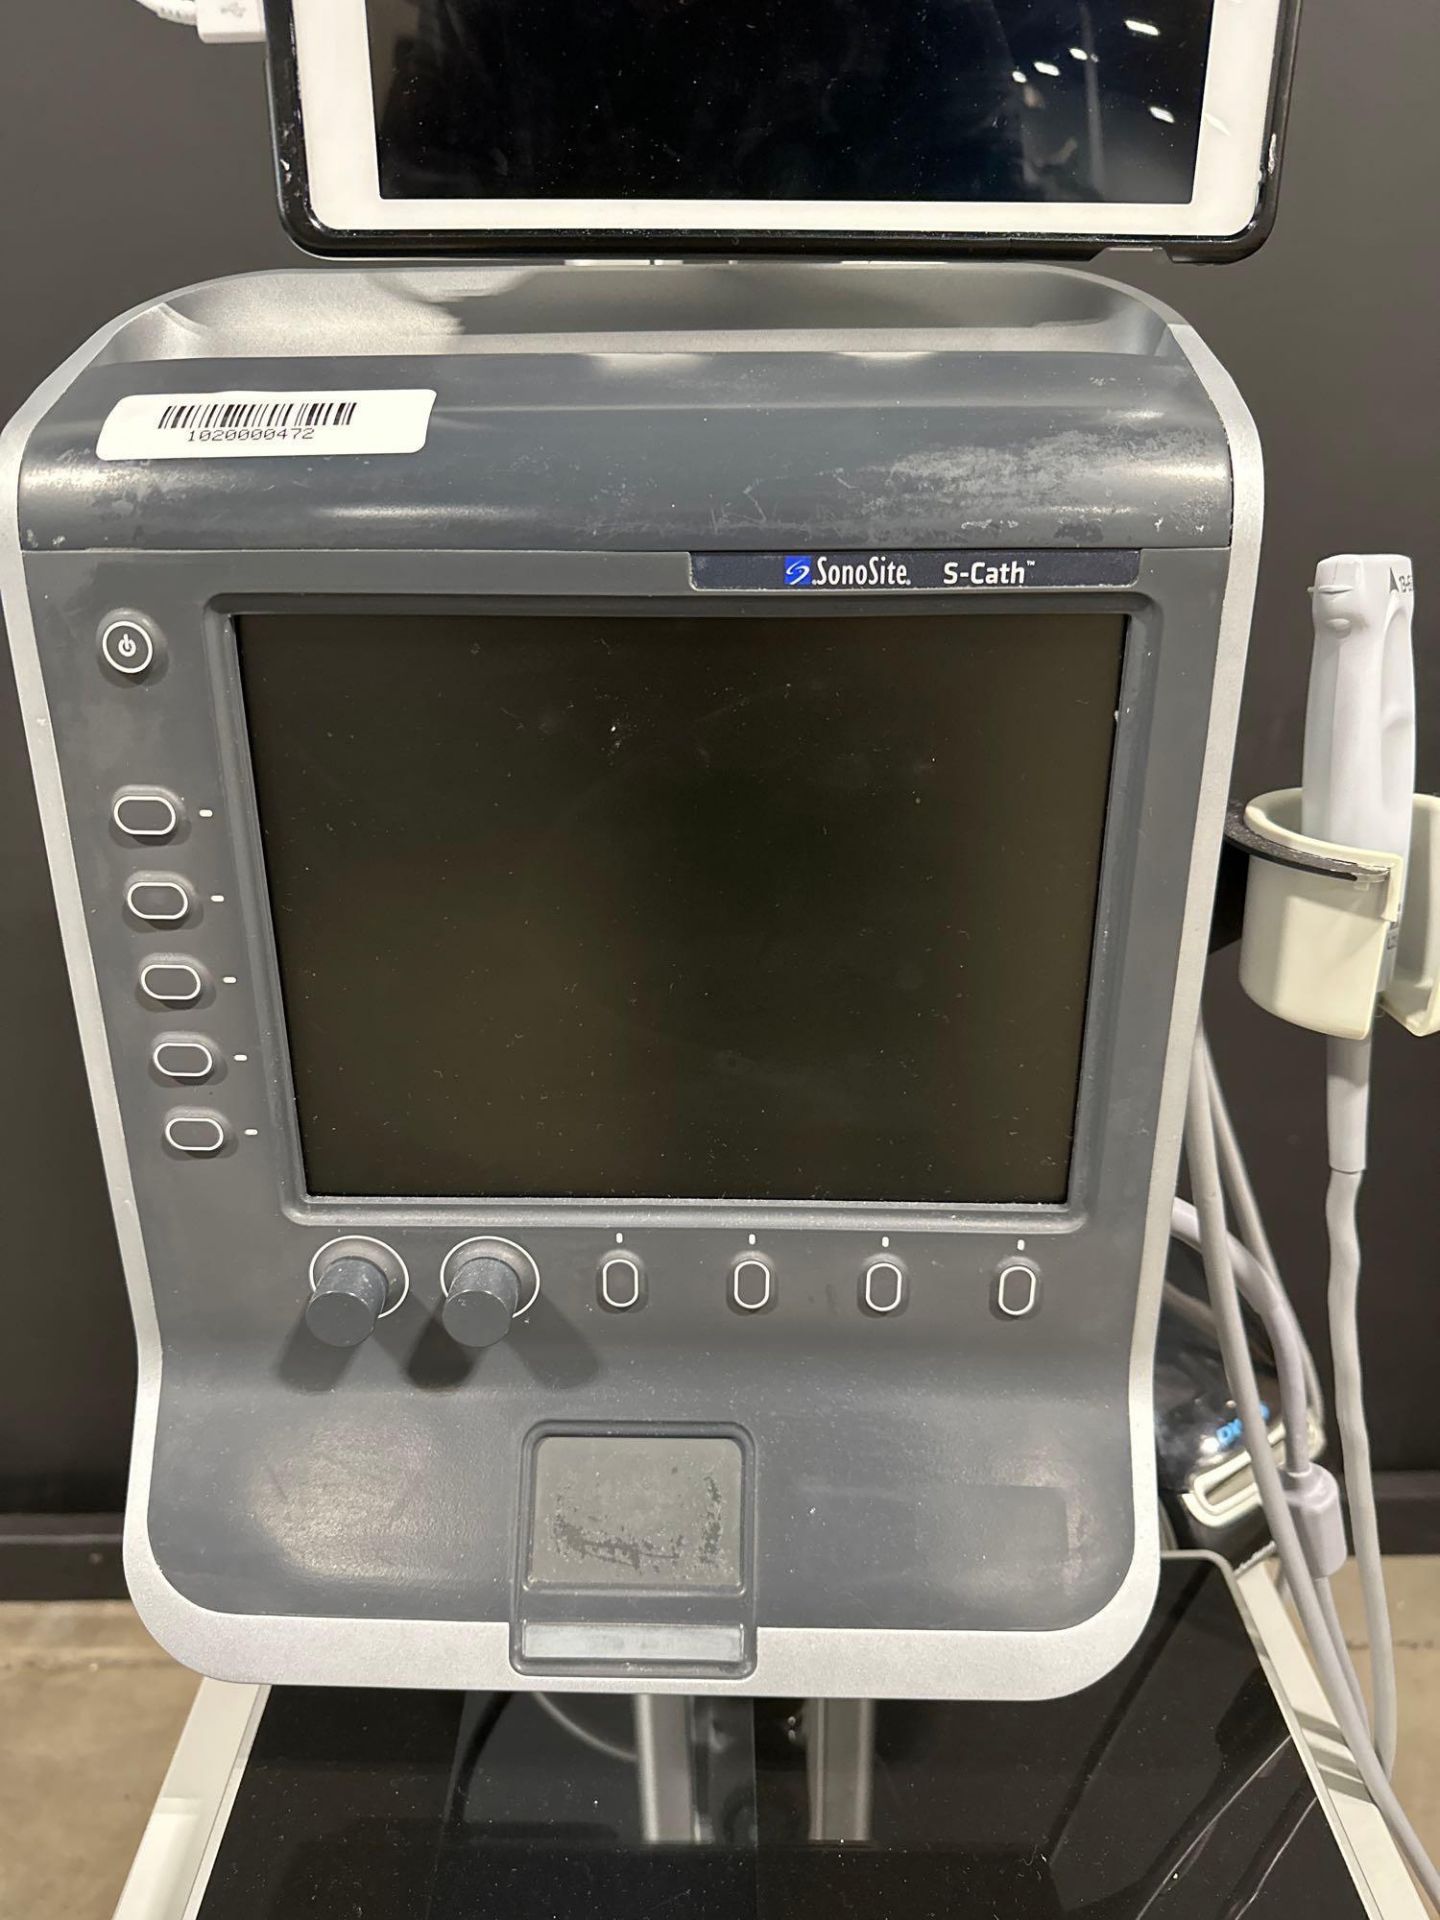 SONOSITE S CATH ULTRASOUND SYSTEM - Image 6 of 6